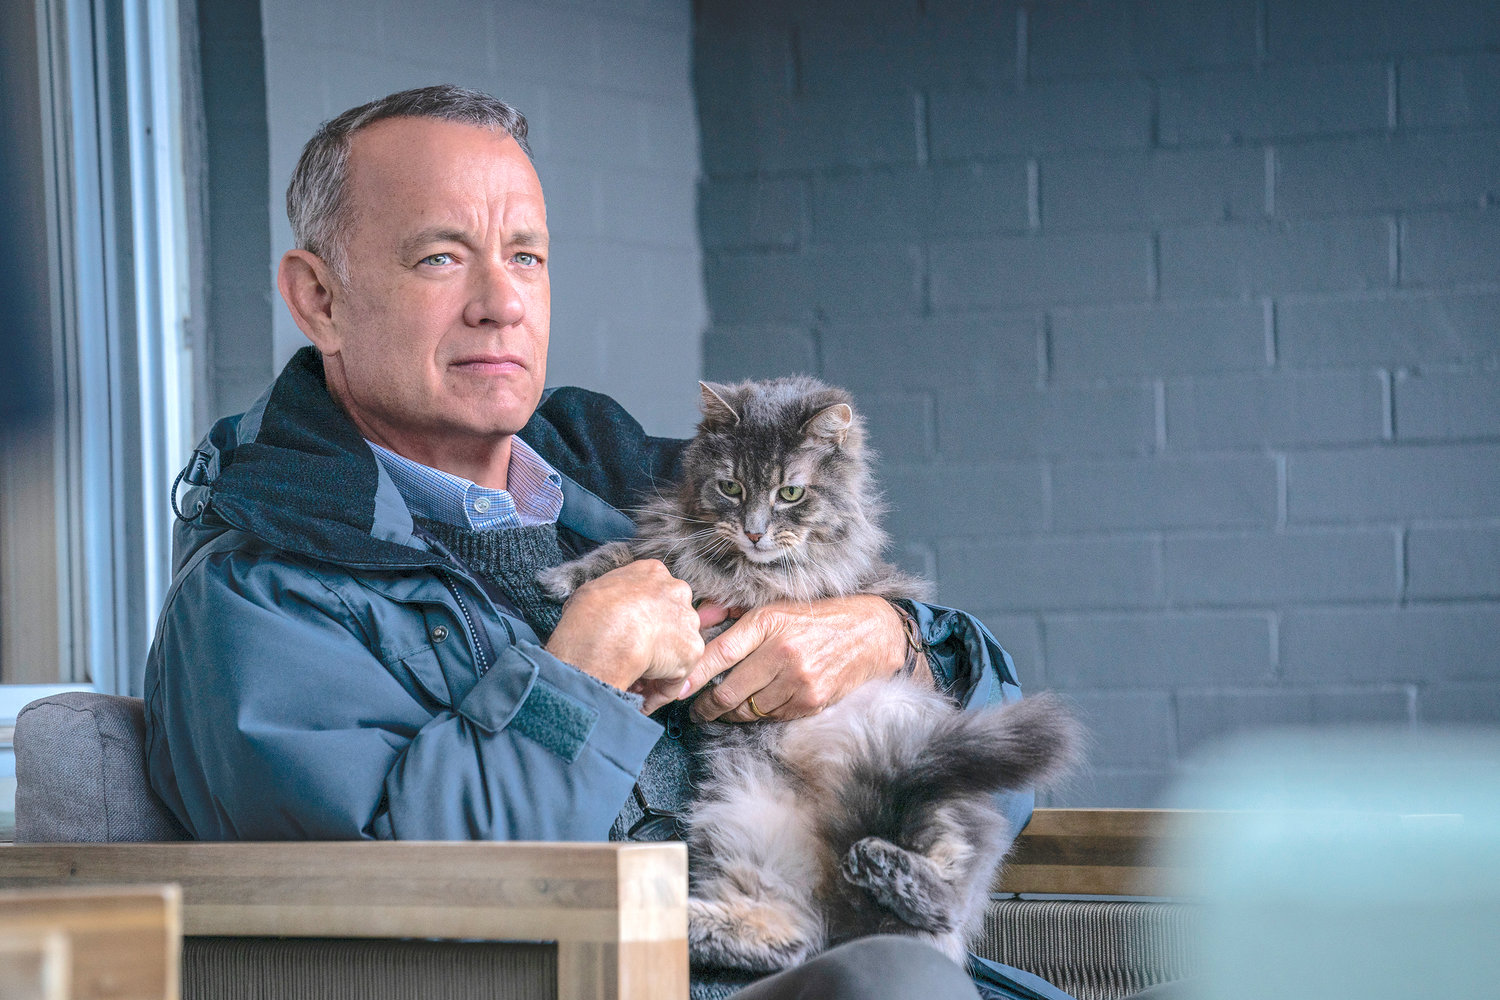 REVIEW: A grumpy Tom Hanks stars in 'A Man Called Otto' | Daily Sentinel